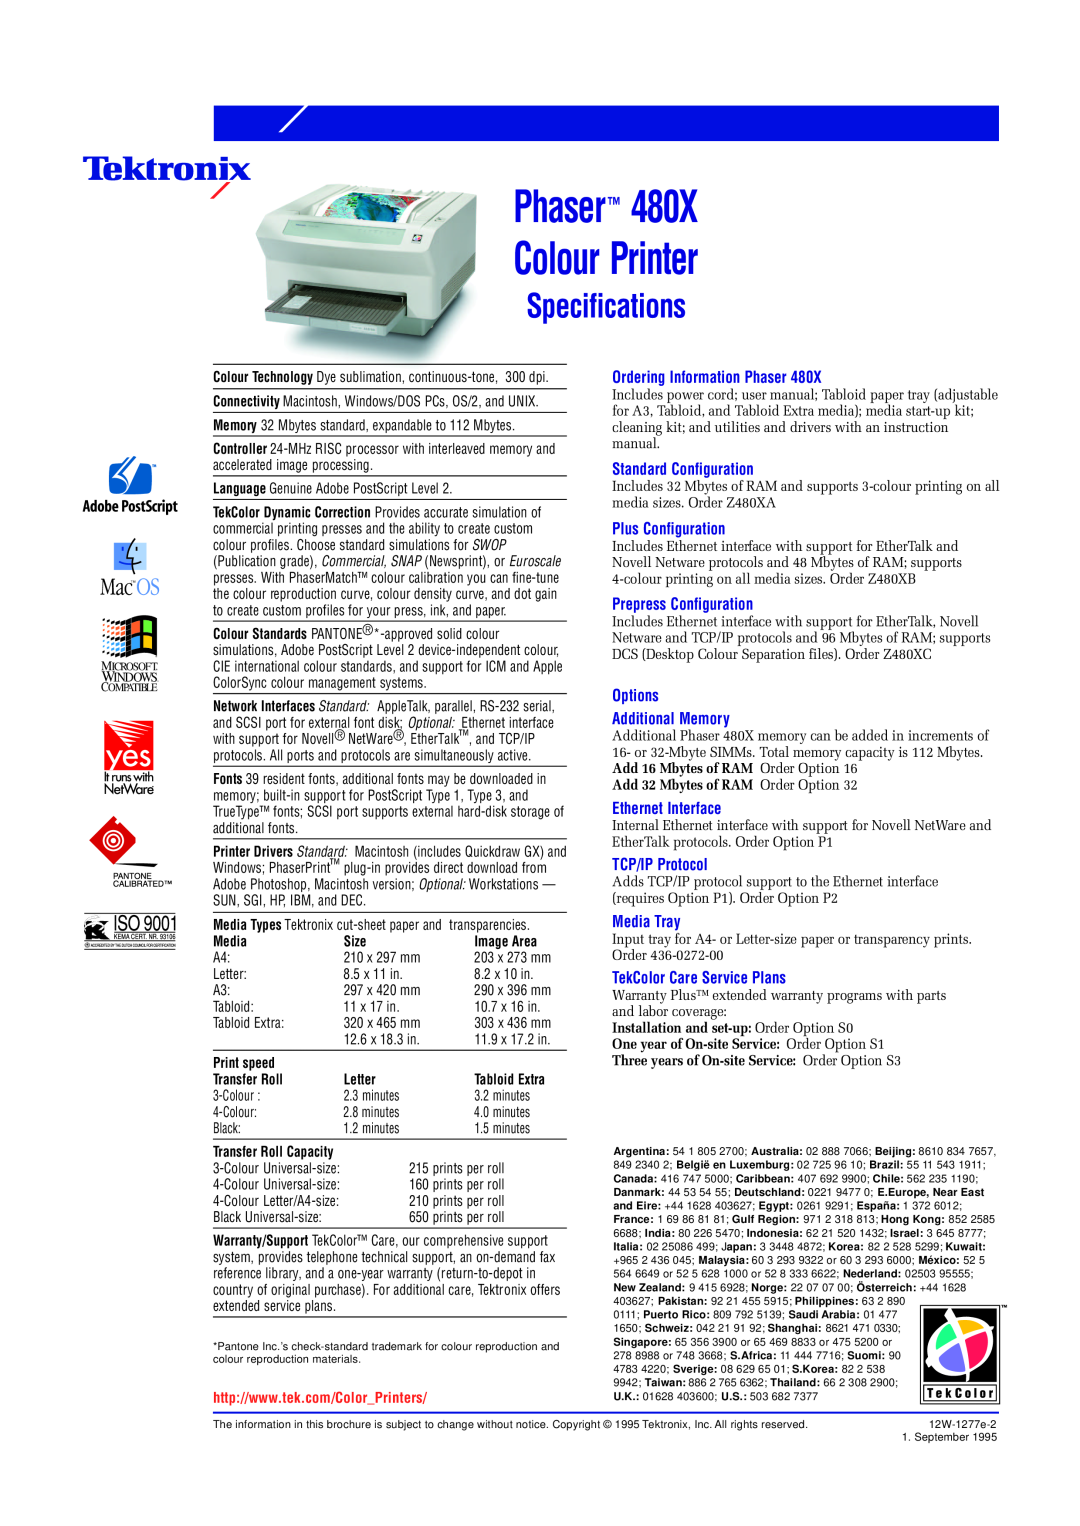 Xerox Specifications, Phaser 480X Colour Printer, Ordering Information Phaser, Standard Configuration, TCP/IP Protocol 